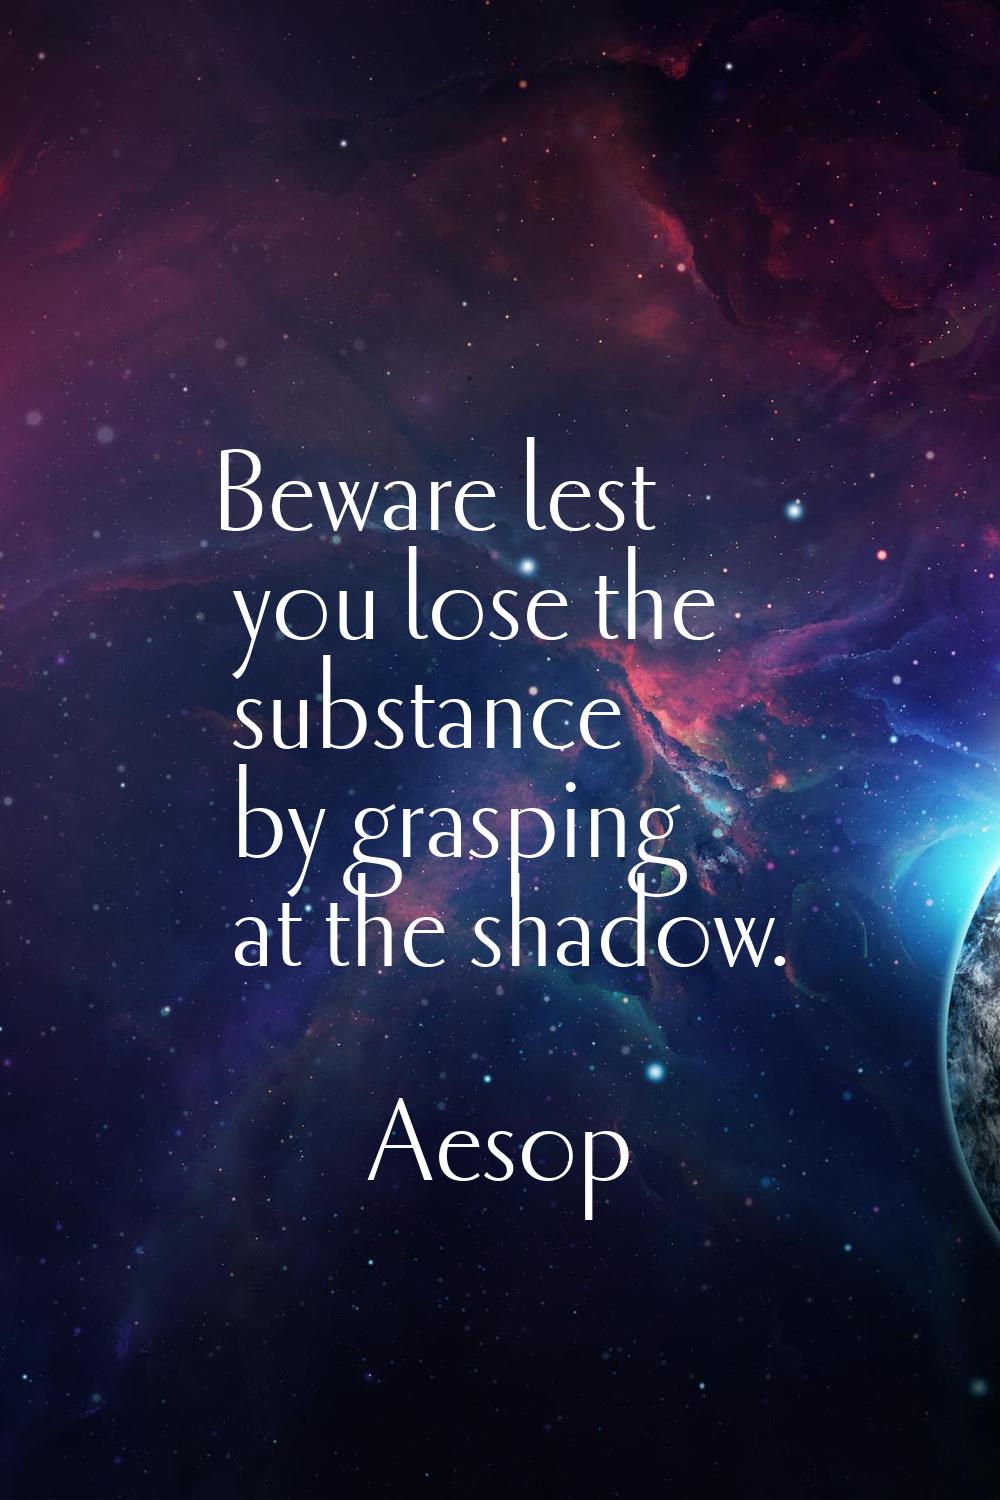 Beware lest you lose the substance by grasping at the shadow.